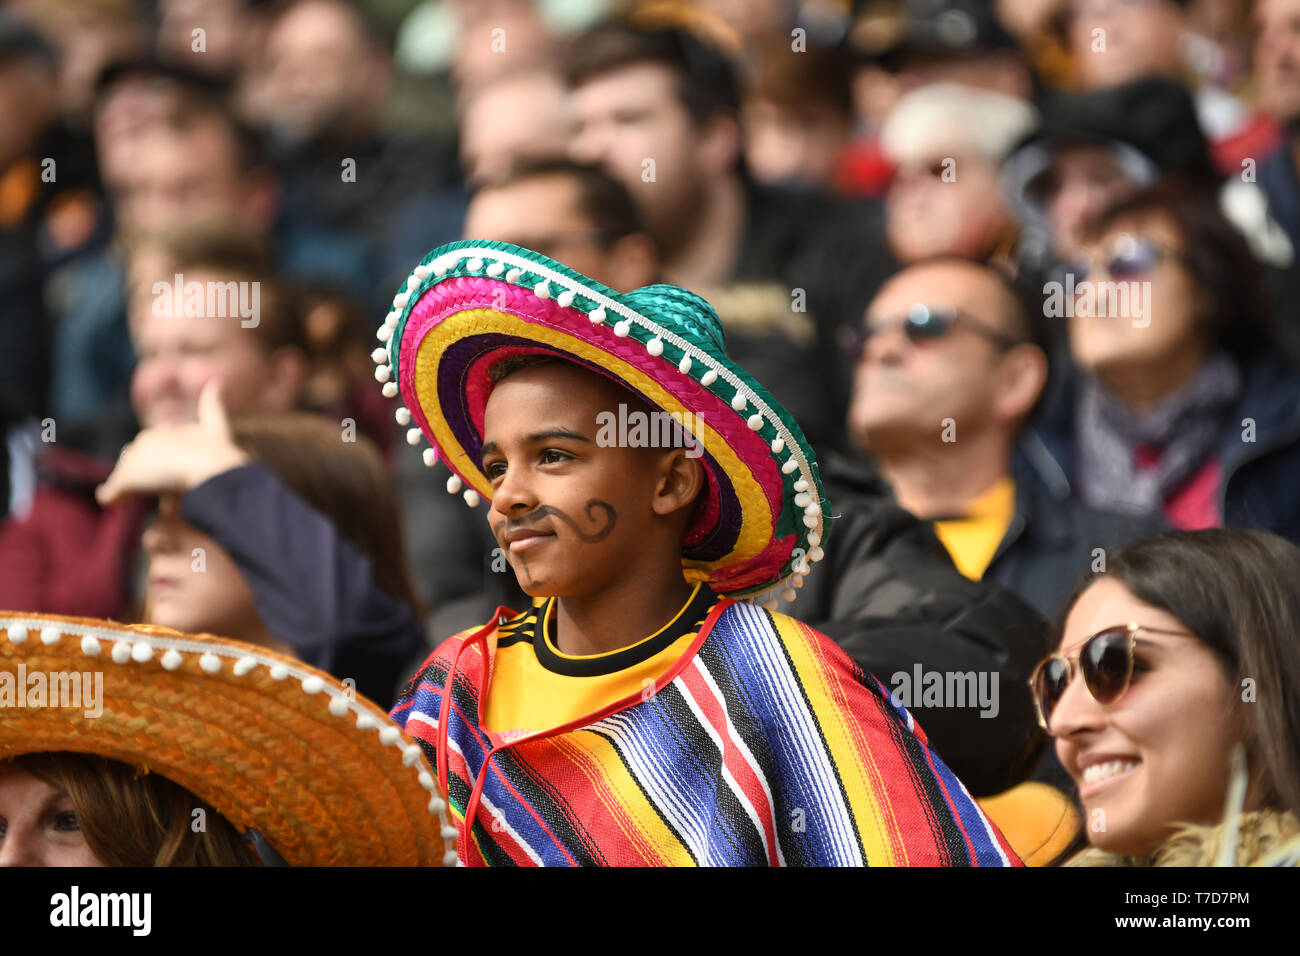 Young boy football fan supporter wearing Mexican hat Britain UK Stock Photo